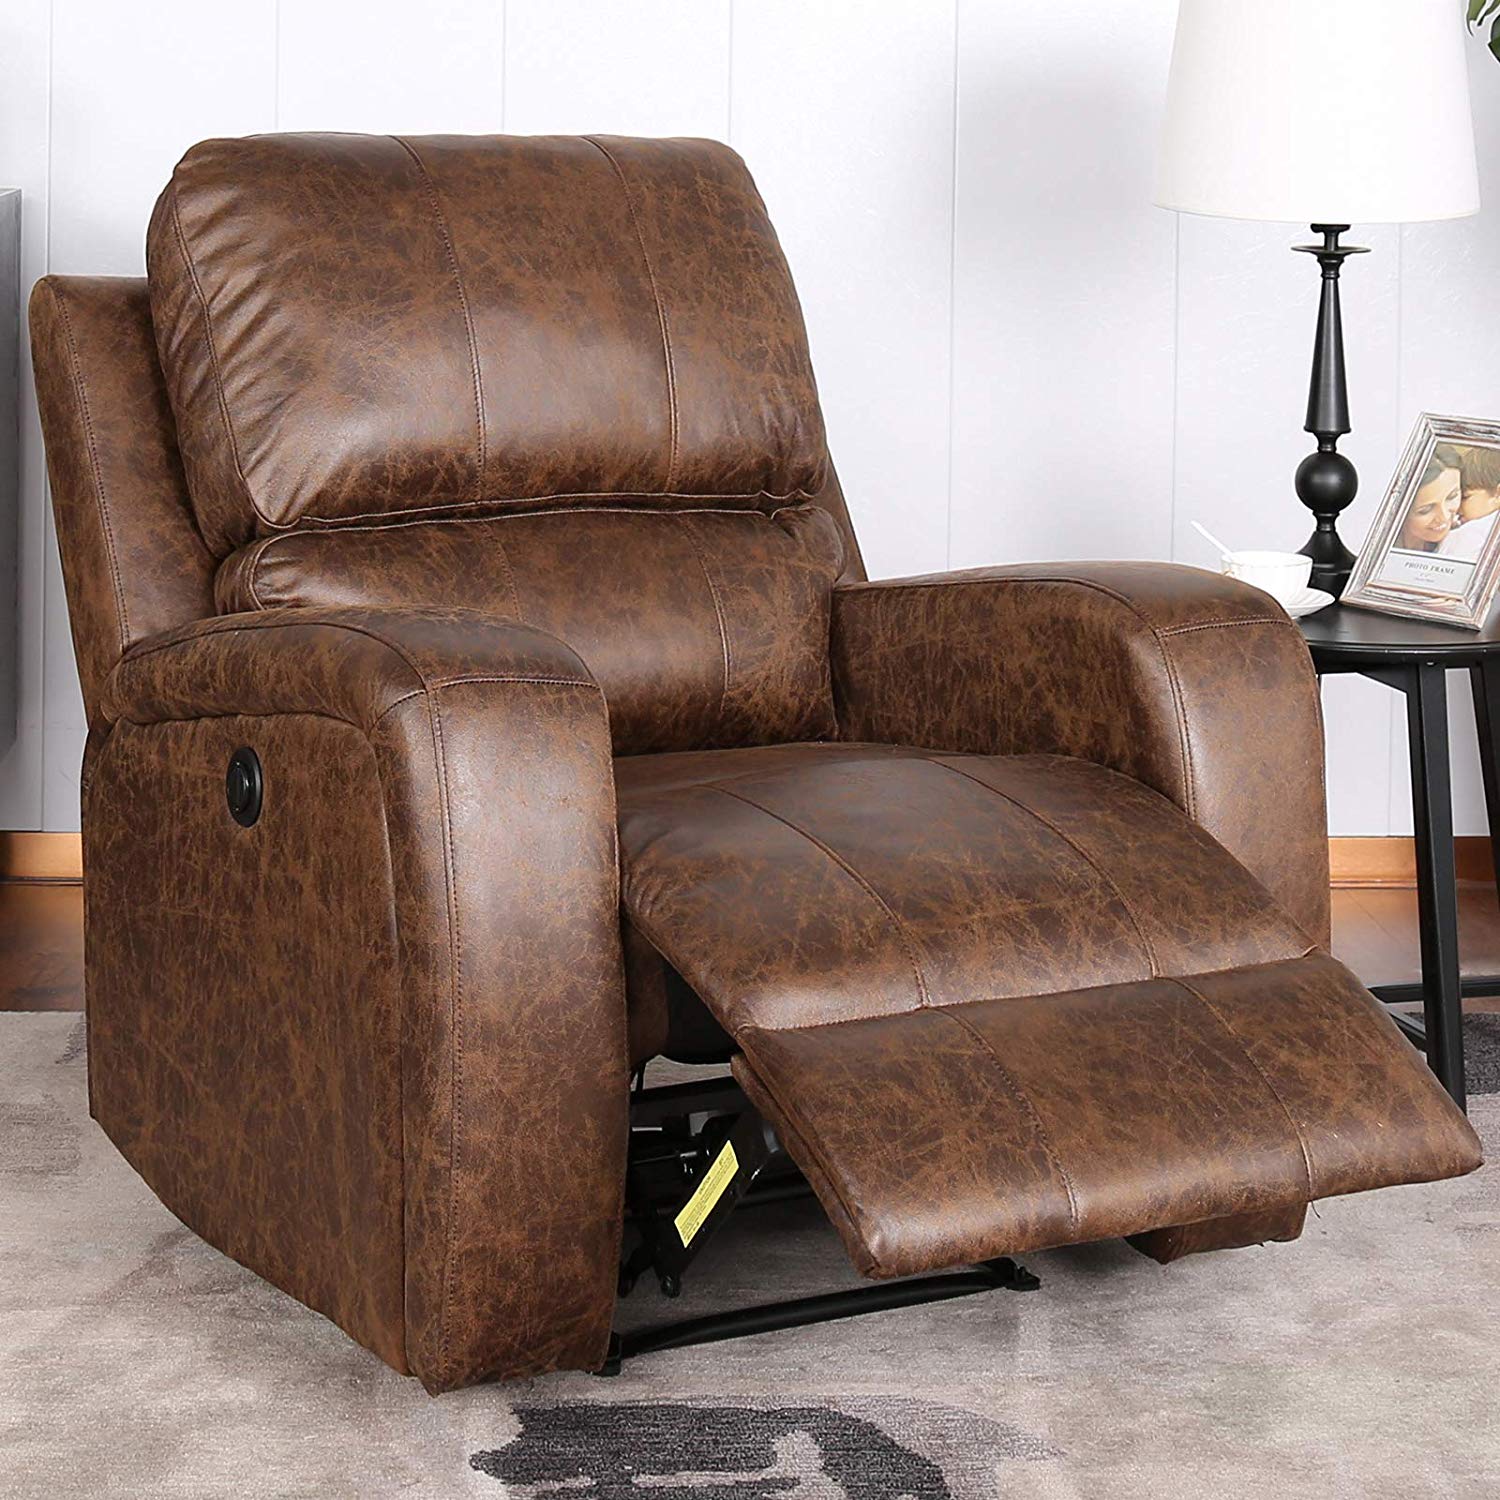 Power Recliner Chair Lazy Boy Sofa Lounge With Usb Port Home Theater